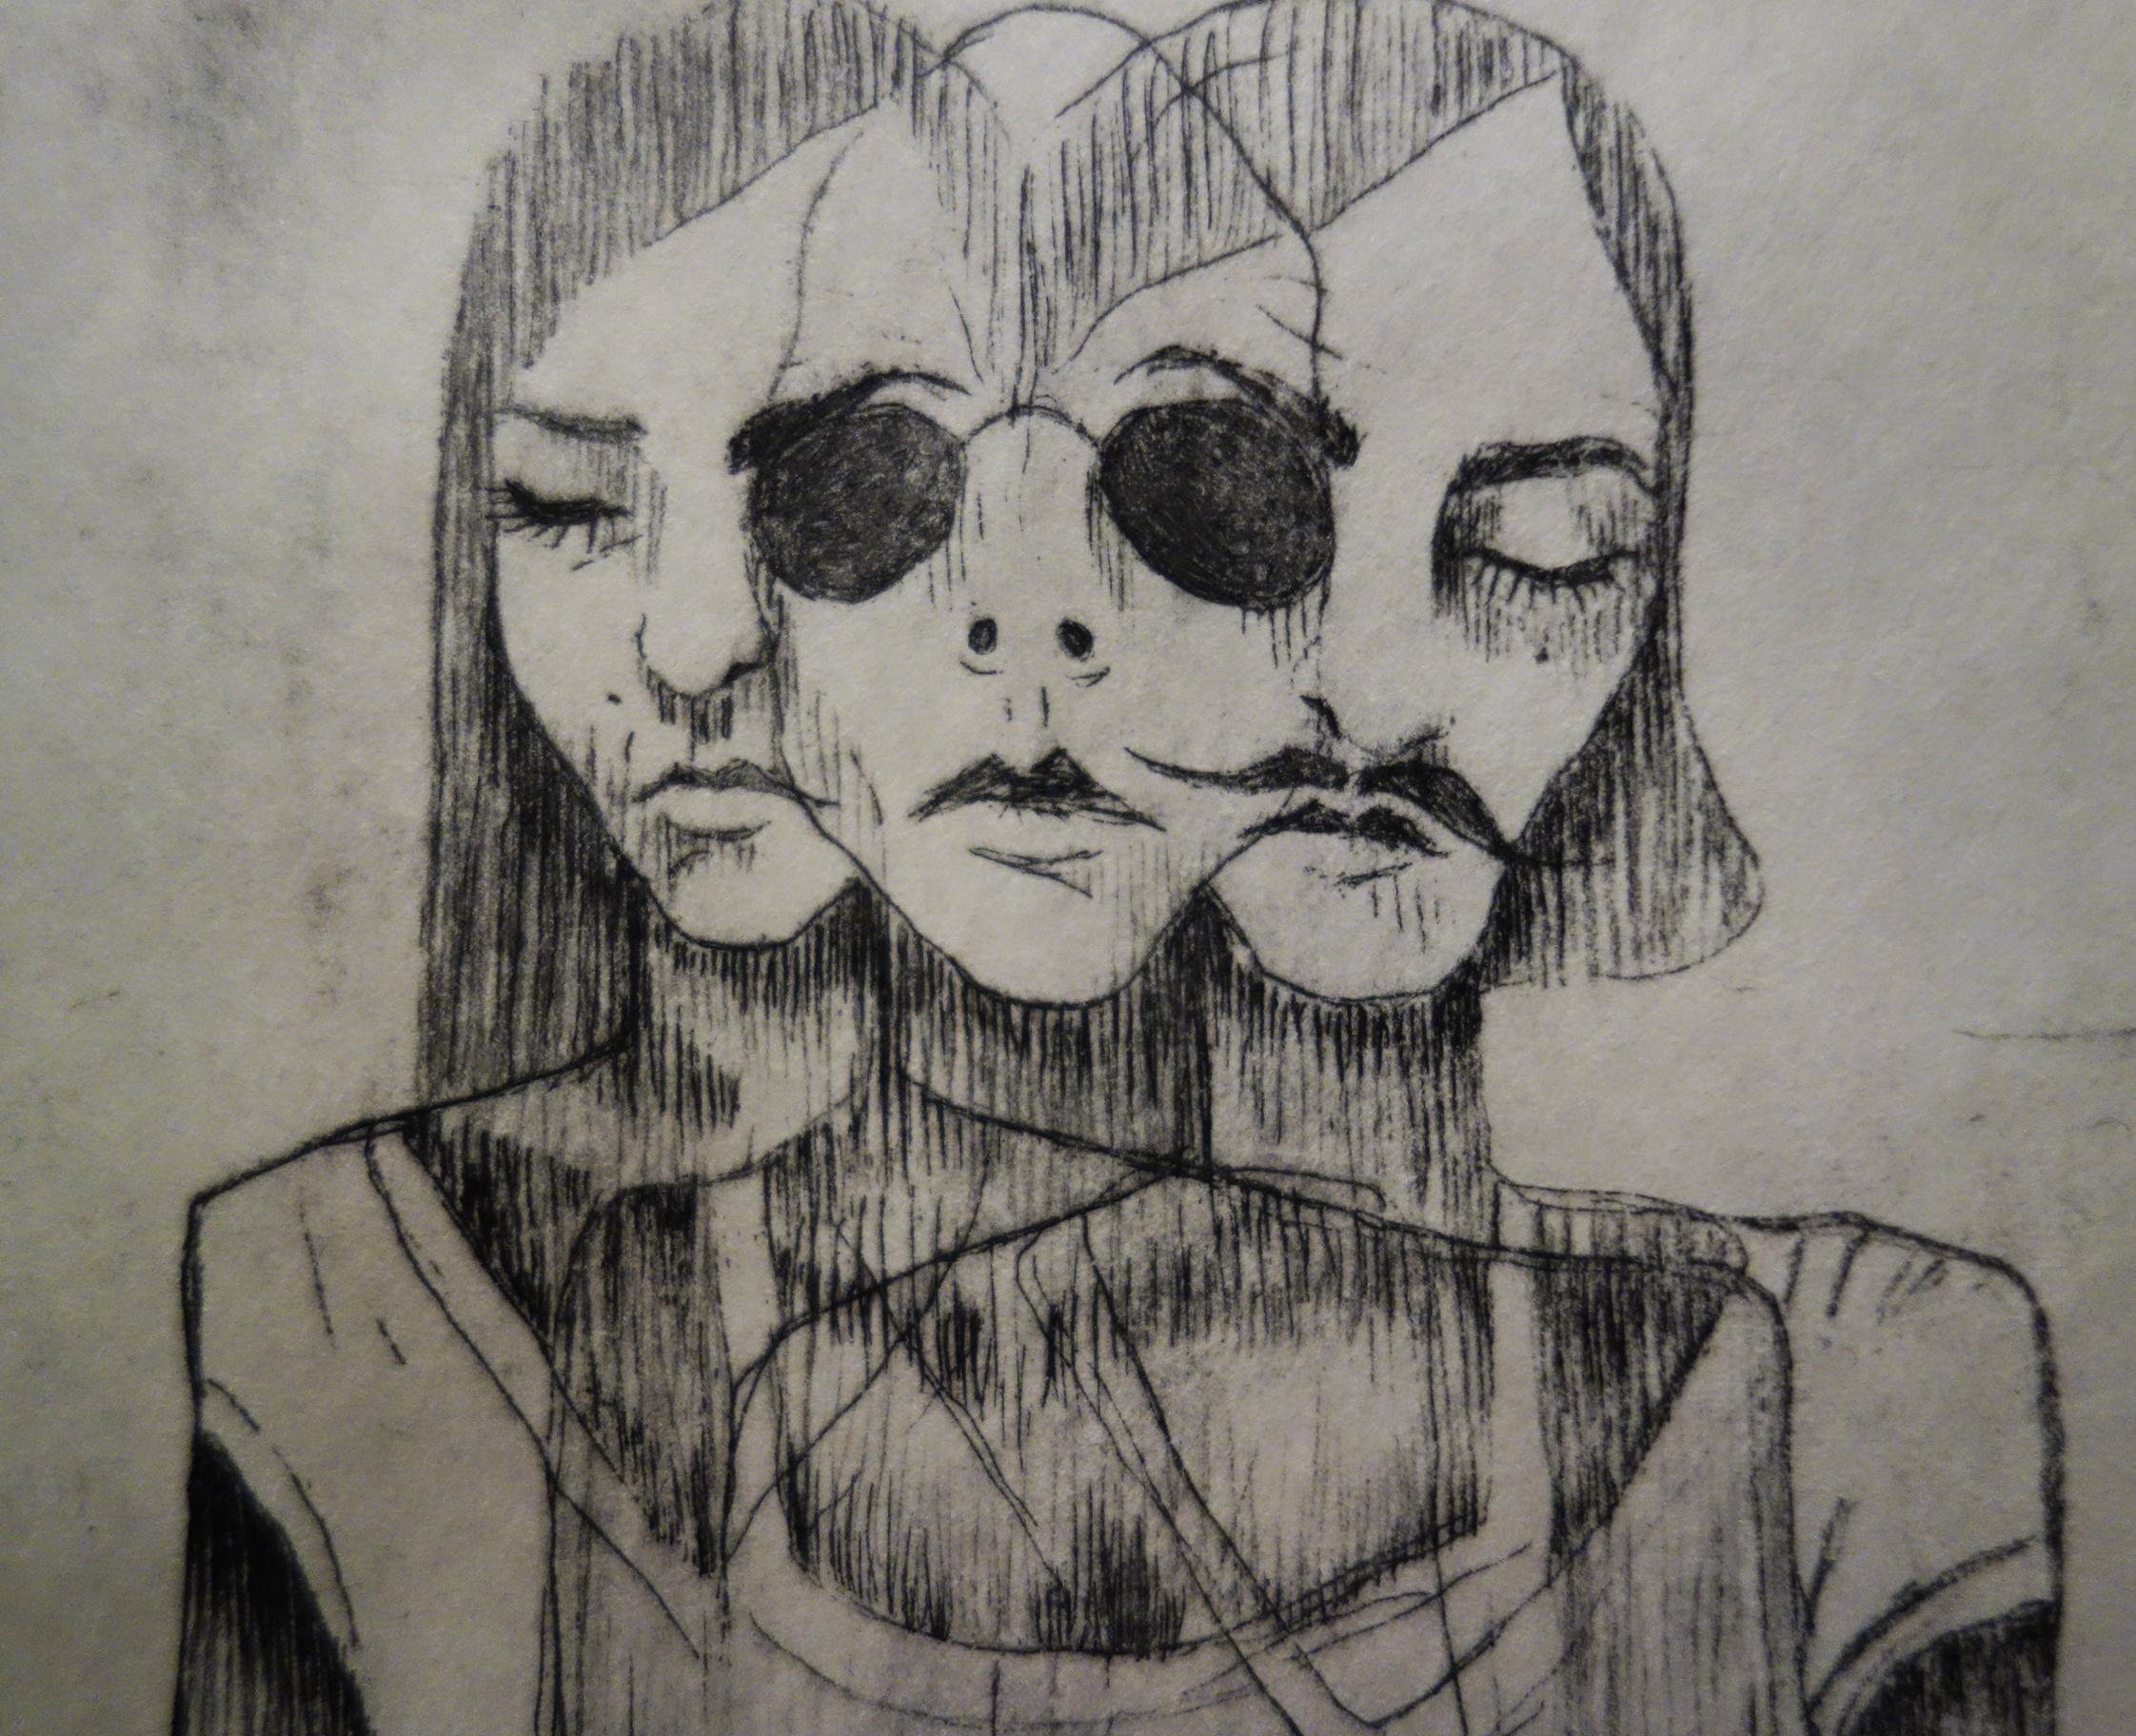 Etching, 18x10cm, 2014, sold